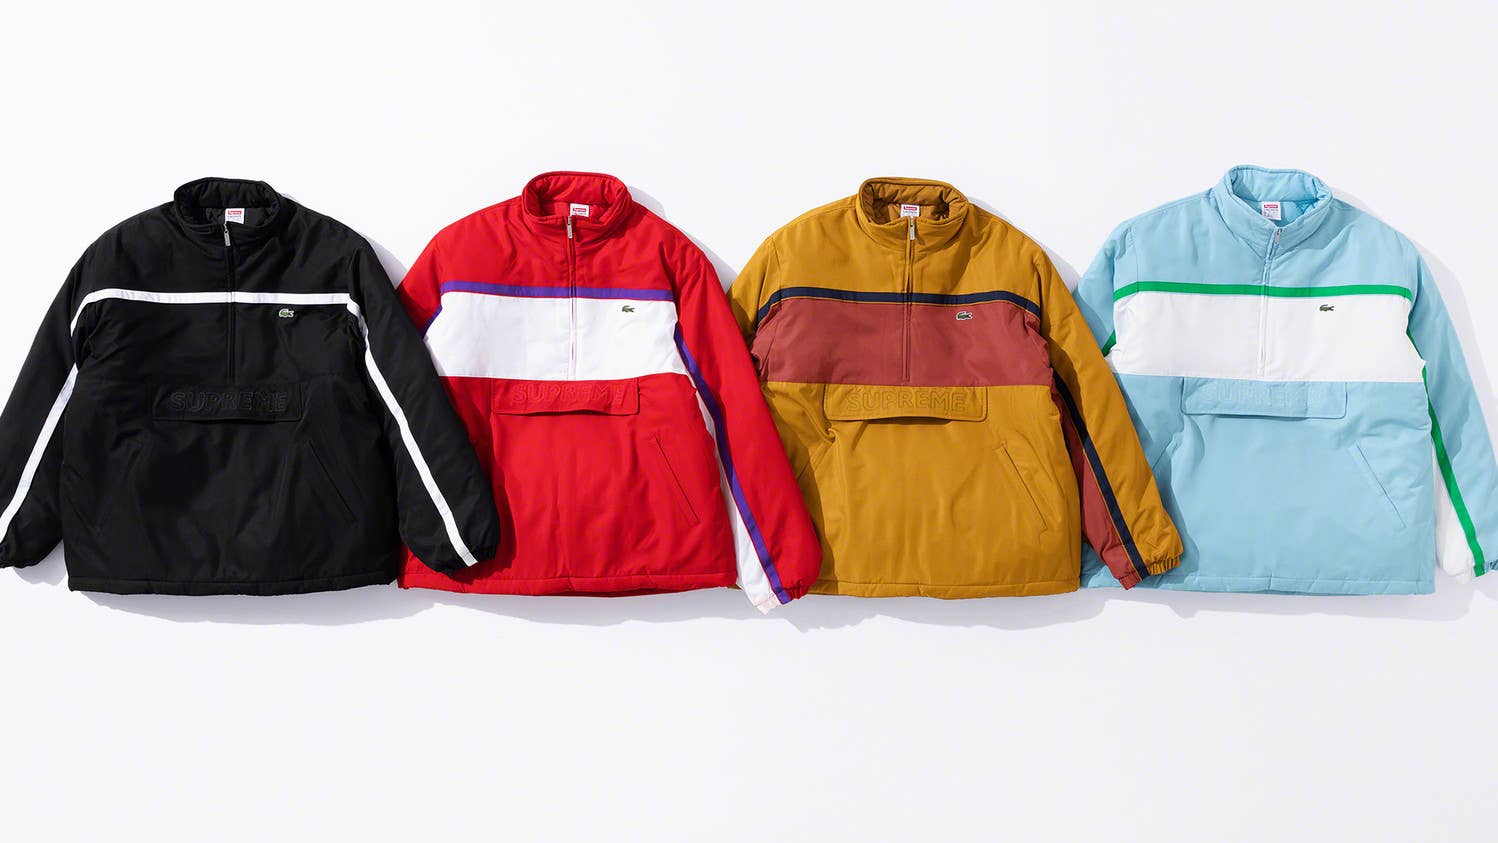 Style Releases This Week: Lacoste x Supreme, Just Don, Off-White x End. Clothing, More